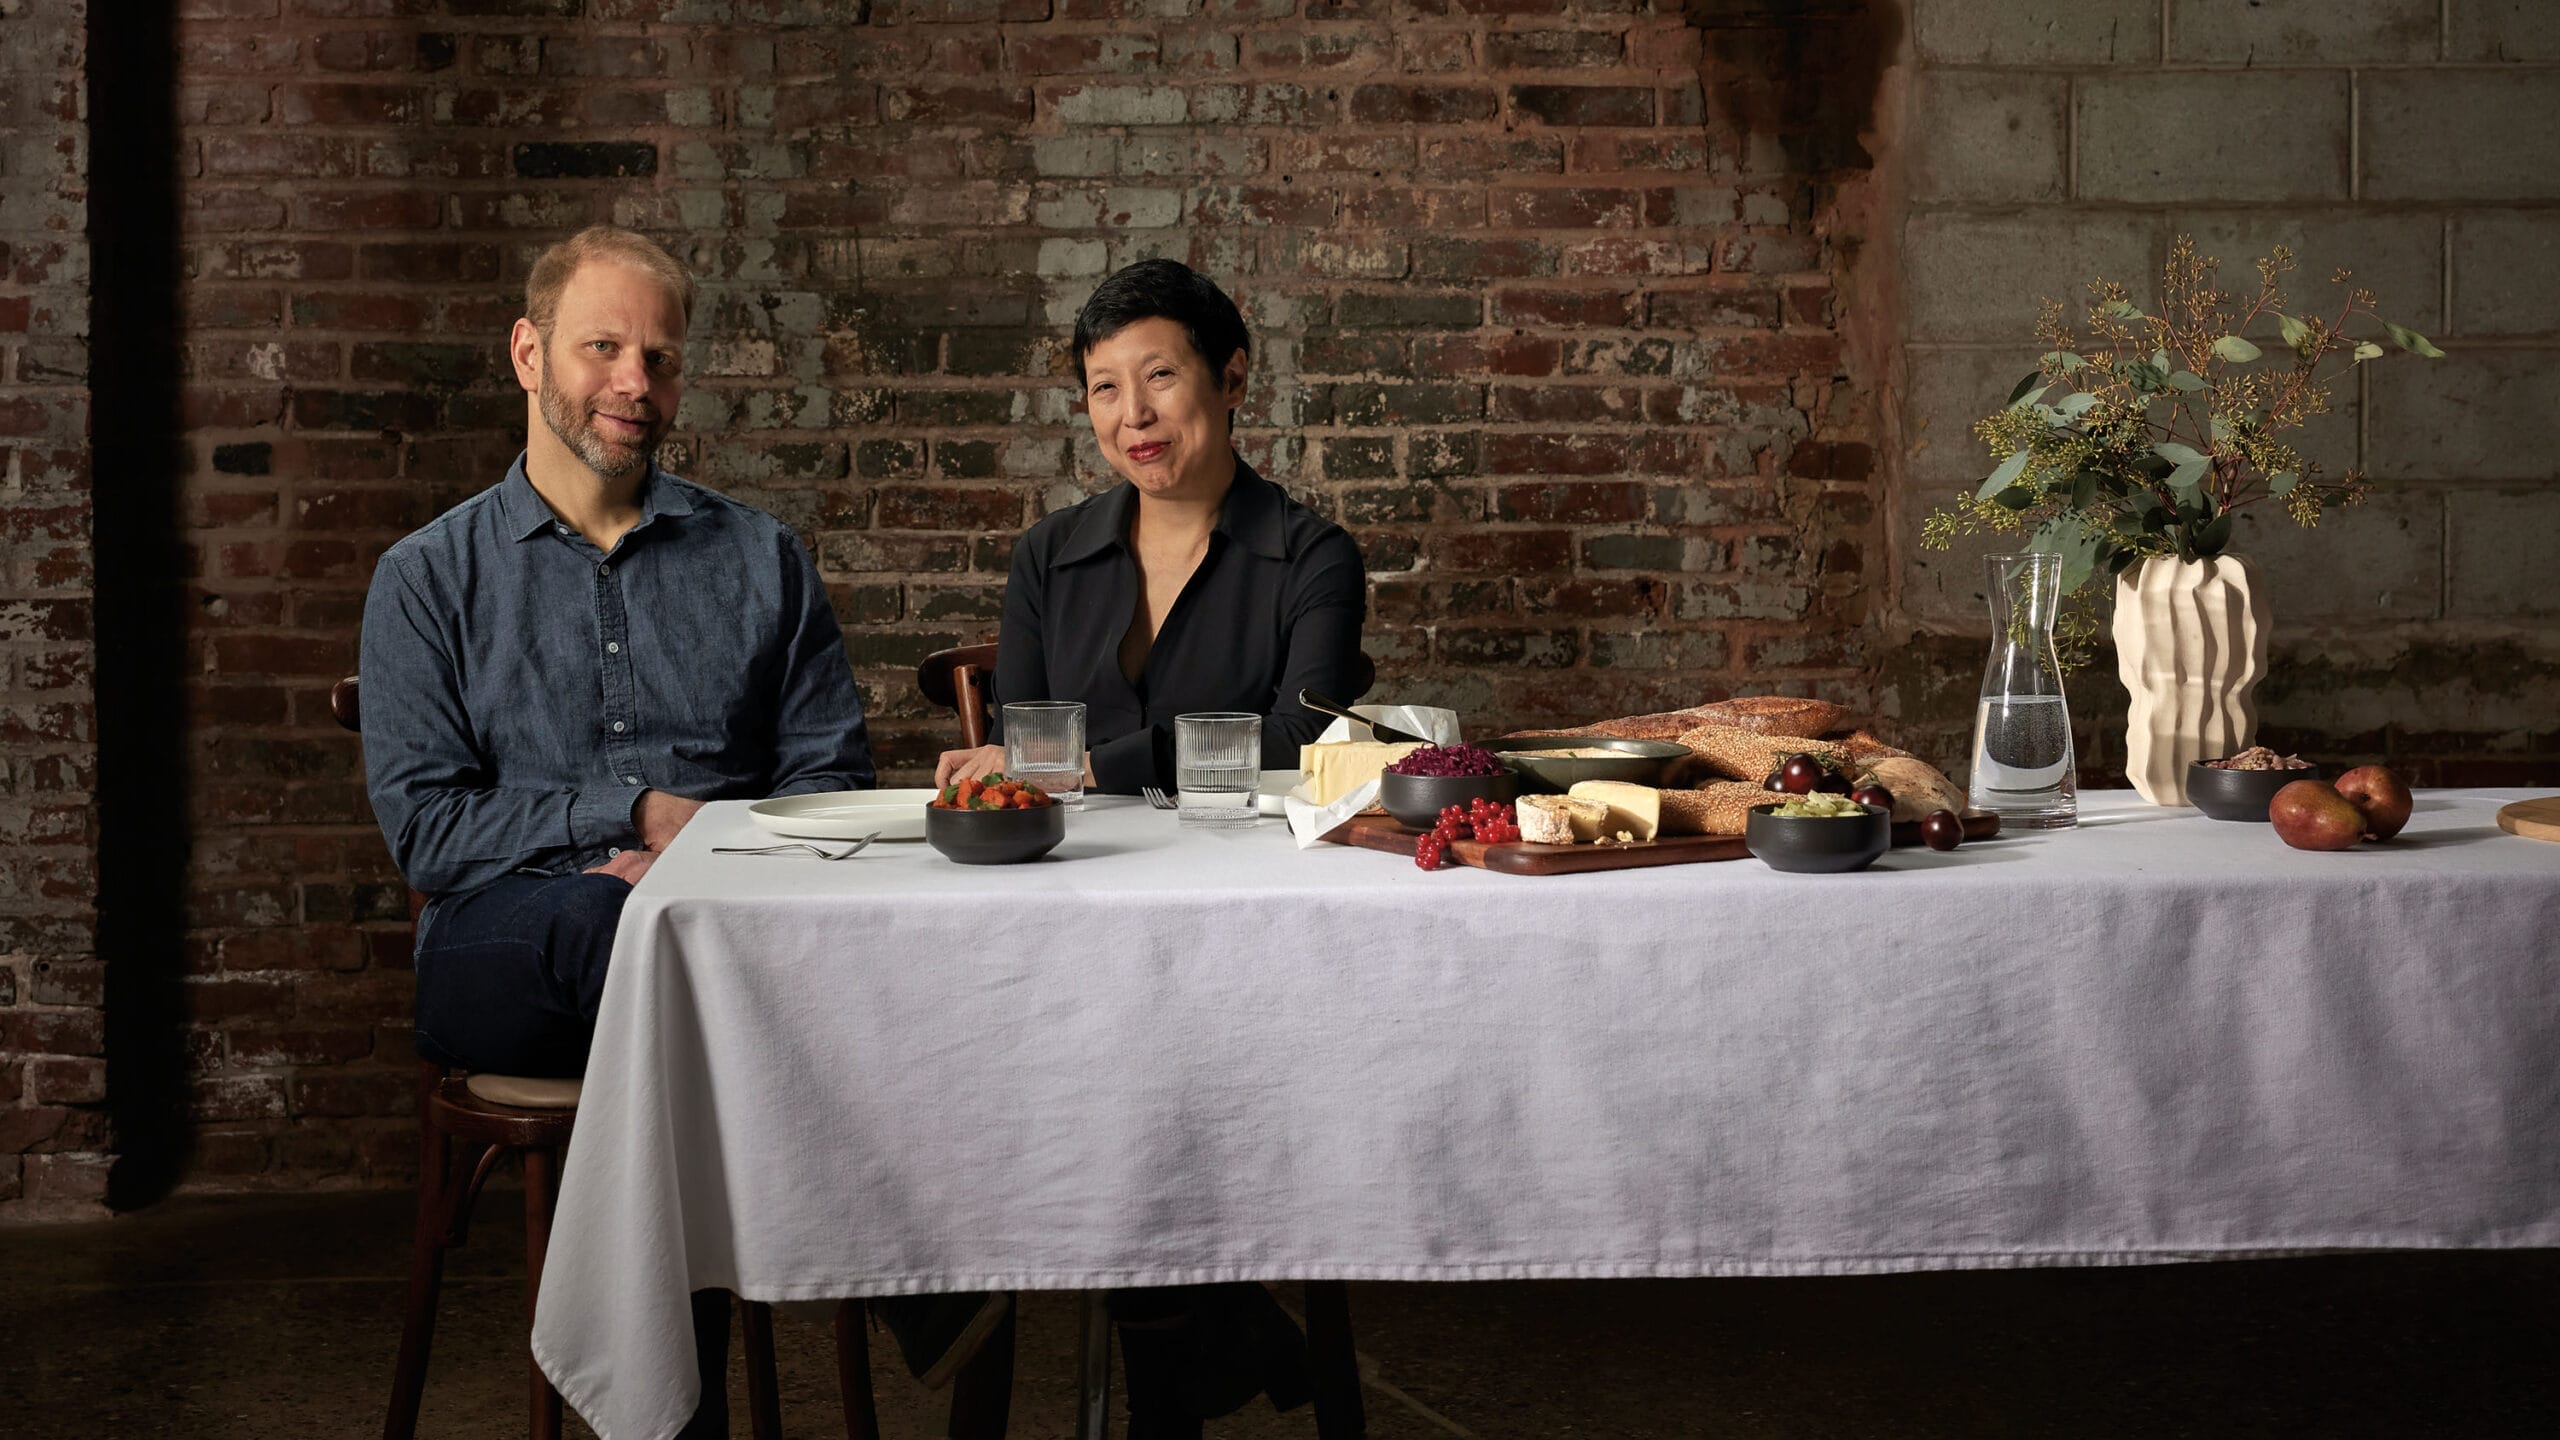 A man in a denim button-down shirt and a woman in a black button-down shirt sit together against a brick wall in front of a table covered with a white tablecloth, glasses and a pitcher of water, a vase, bread, cheese, and fruits.